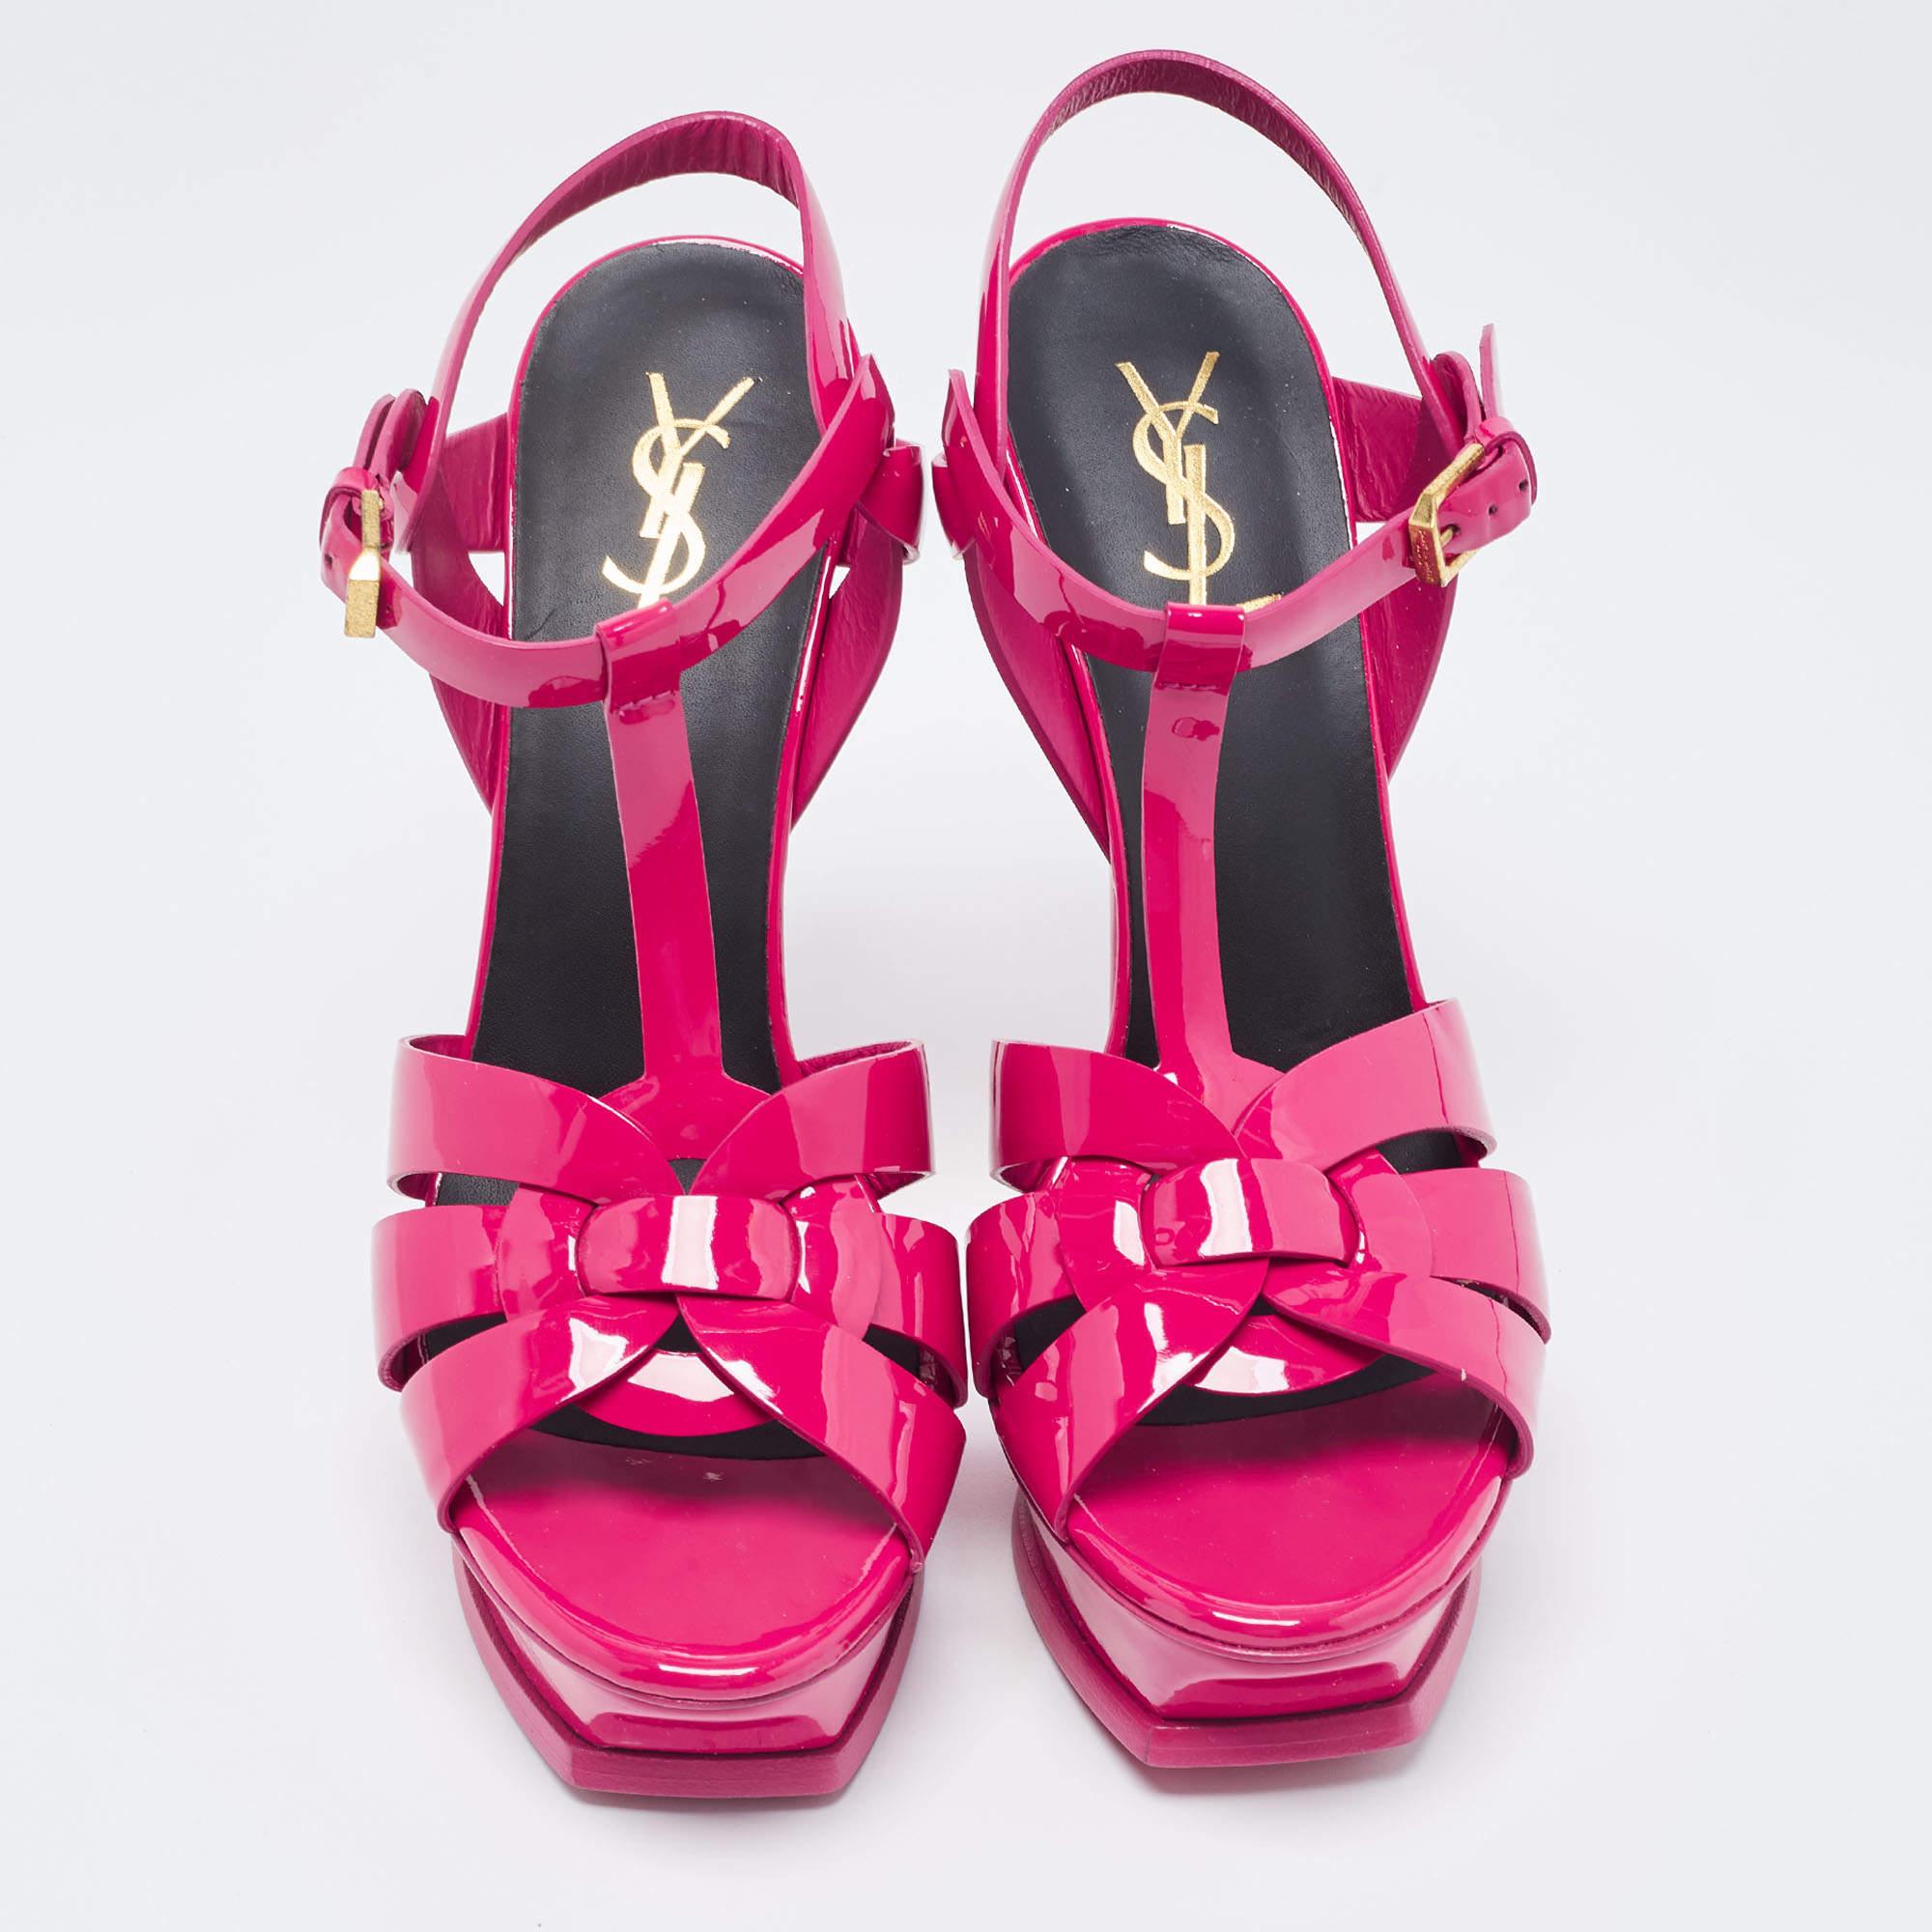 The fashionista in you will fall in love with these Saint Laurent Tribute sandals. They are made from leather with intertwined straps on the vamps and ankle buckle closure. The gold-tone hardware, 14cm heels, and platform give this pair a fine